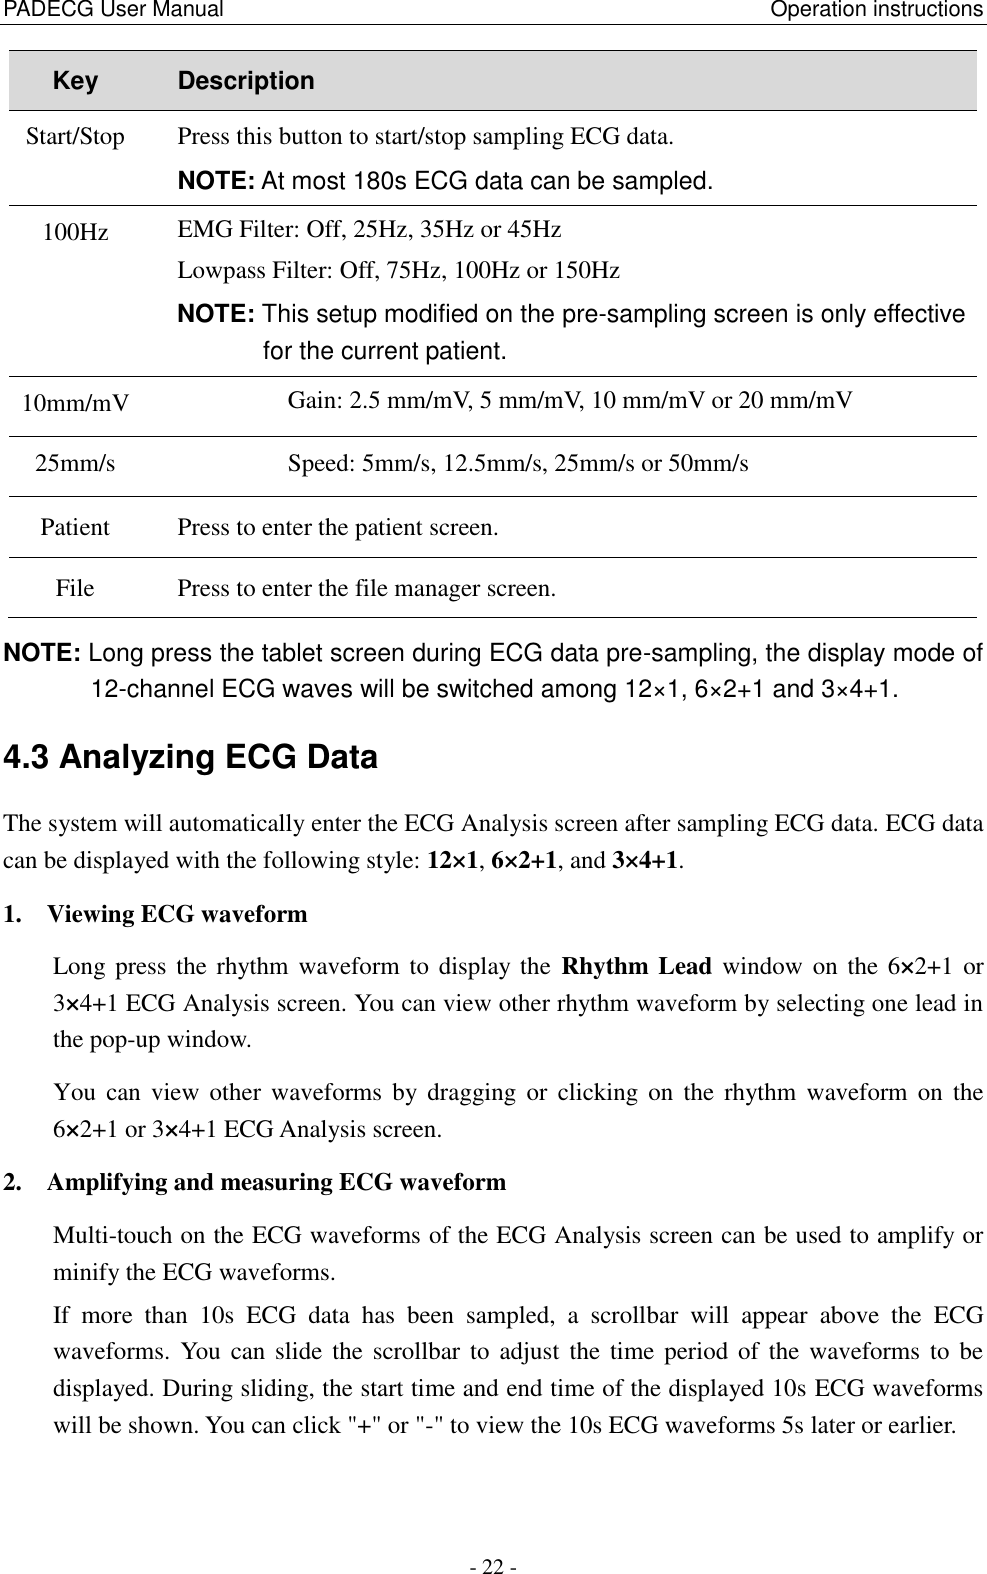 PADECG User Manual                                                  Operation instructions - 22 - Key Description Start/Stop Press this button to start/stop sampling ECG data.   NOTE: At most 180s ECG data can be sampled.   100Hz EMG Filter: Off, 25Hz, 35Hz or 45Hz Lowpass Filter: Off, 75Hz, 100Hz or 150Hz NOTE: This setup modified on the pre-sampling screen is only effective for the current patient.   10mm/mV Gain: 2.5 mm/mV, 5 mm/mV, 10 mm/mV or 20 mm/mV 25mm/s Speed: 5mm/s, 12.5mm/s, 25mm/s or 50mm/s Patient Press to enter the patient screen. File Press to enter the file manager screen. NOTE: Long press the tablet screen during ECG data pre-sampling, the display mode of 12-channel ECG waves will be switched among 12×1, 6×2+1 and 3×4+1. 4.3 Analyzing ECG Data The system will automatically enter the ECG Analysis screen after sampling ECG data. ECG data can be displayed with the following style: 12×1, 6×2+1, and 3×4+1. 1. Viewing ECG waveform Long press the rhythm waveform to  display the  Rhythm Lead window on the 6×2+1 or 3×4+1 ECG Analysis screen. You can view other rhythm waveform by selecting one lead in the pop-up window. You  can  view  other  waveforms  by  dragging  or  clicking  on  the  rhythm  waveform  on  the 6×2+1 or 3×4+1 ECG Analysis screen.   2. Amplifying and measuring ECG waveform Multi-touch on the ECG waveforms of the ECG Analysis screen can be used to amplify or minify the ECG waveforms. If  more  than  10s  ECG  data  has  been  sampled,  a  scrollbar  will  appear  above  the  ECG waveforms. You  can  slide  the scrollbar to adjust  the time  period  of  the  waveforms  to  be displayed. During sliding, the start time and end time of the displayed 10s ECG waveforms will be shown. You can click &quot;+&quot; or &quot;-&quot; to view the 10s ECG waveforms 5s later or earlier. 